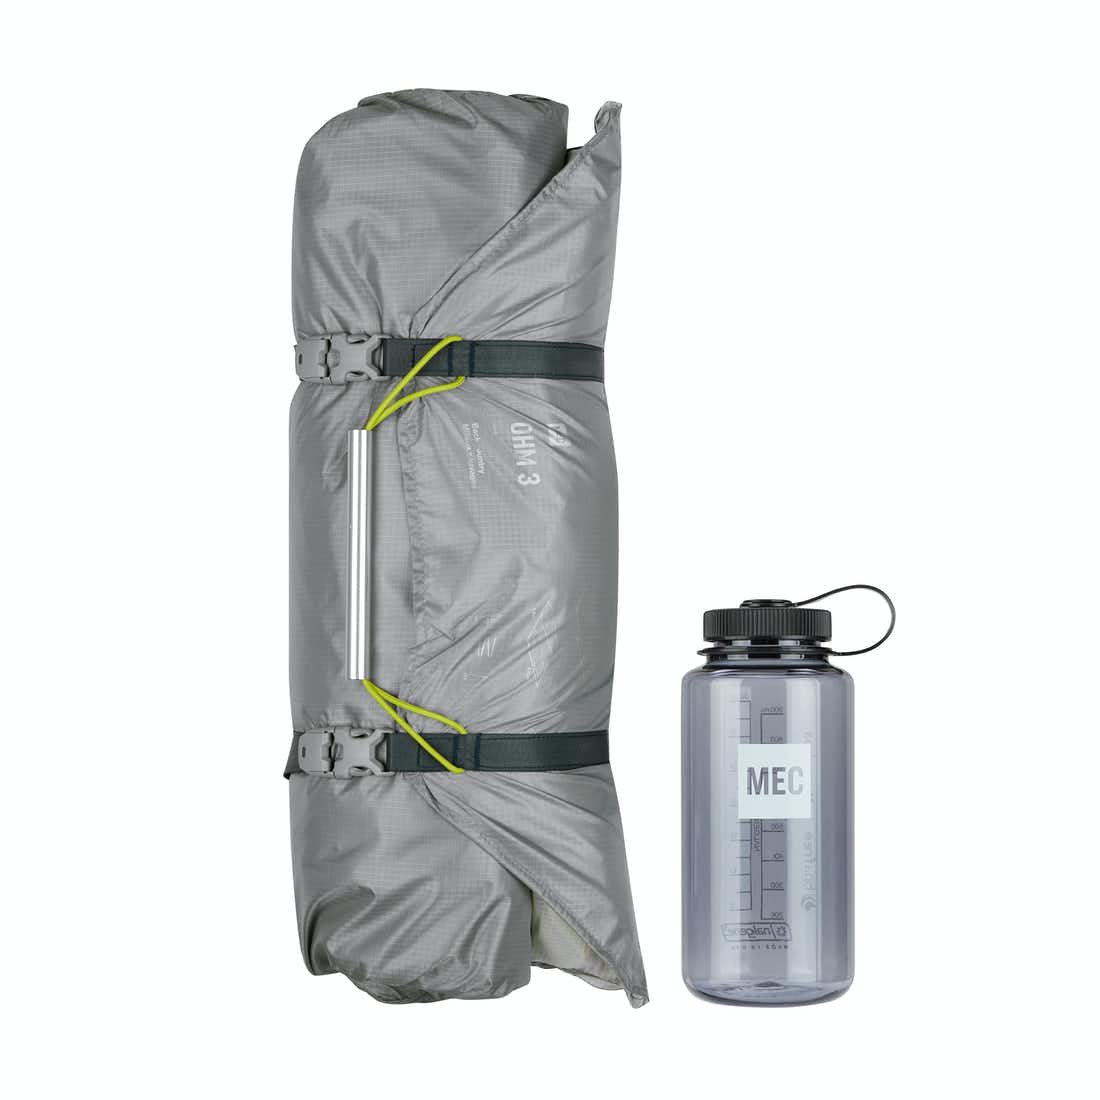 Neo 3 tent - size